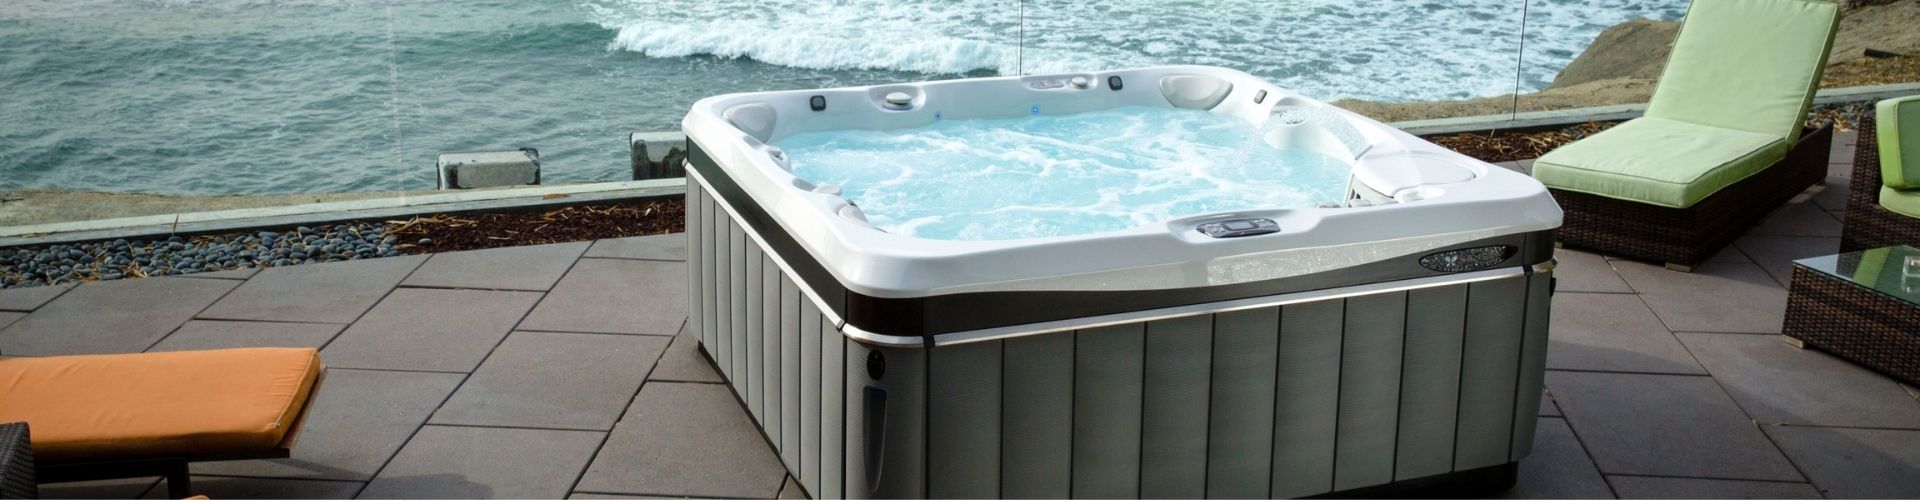 Dealers’ Secrets to Avoiding the Worst Hot Tub Brands and Buying the Perfect Spa